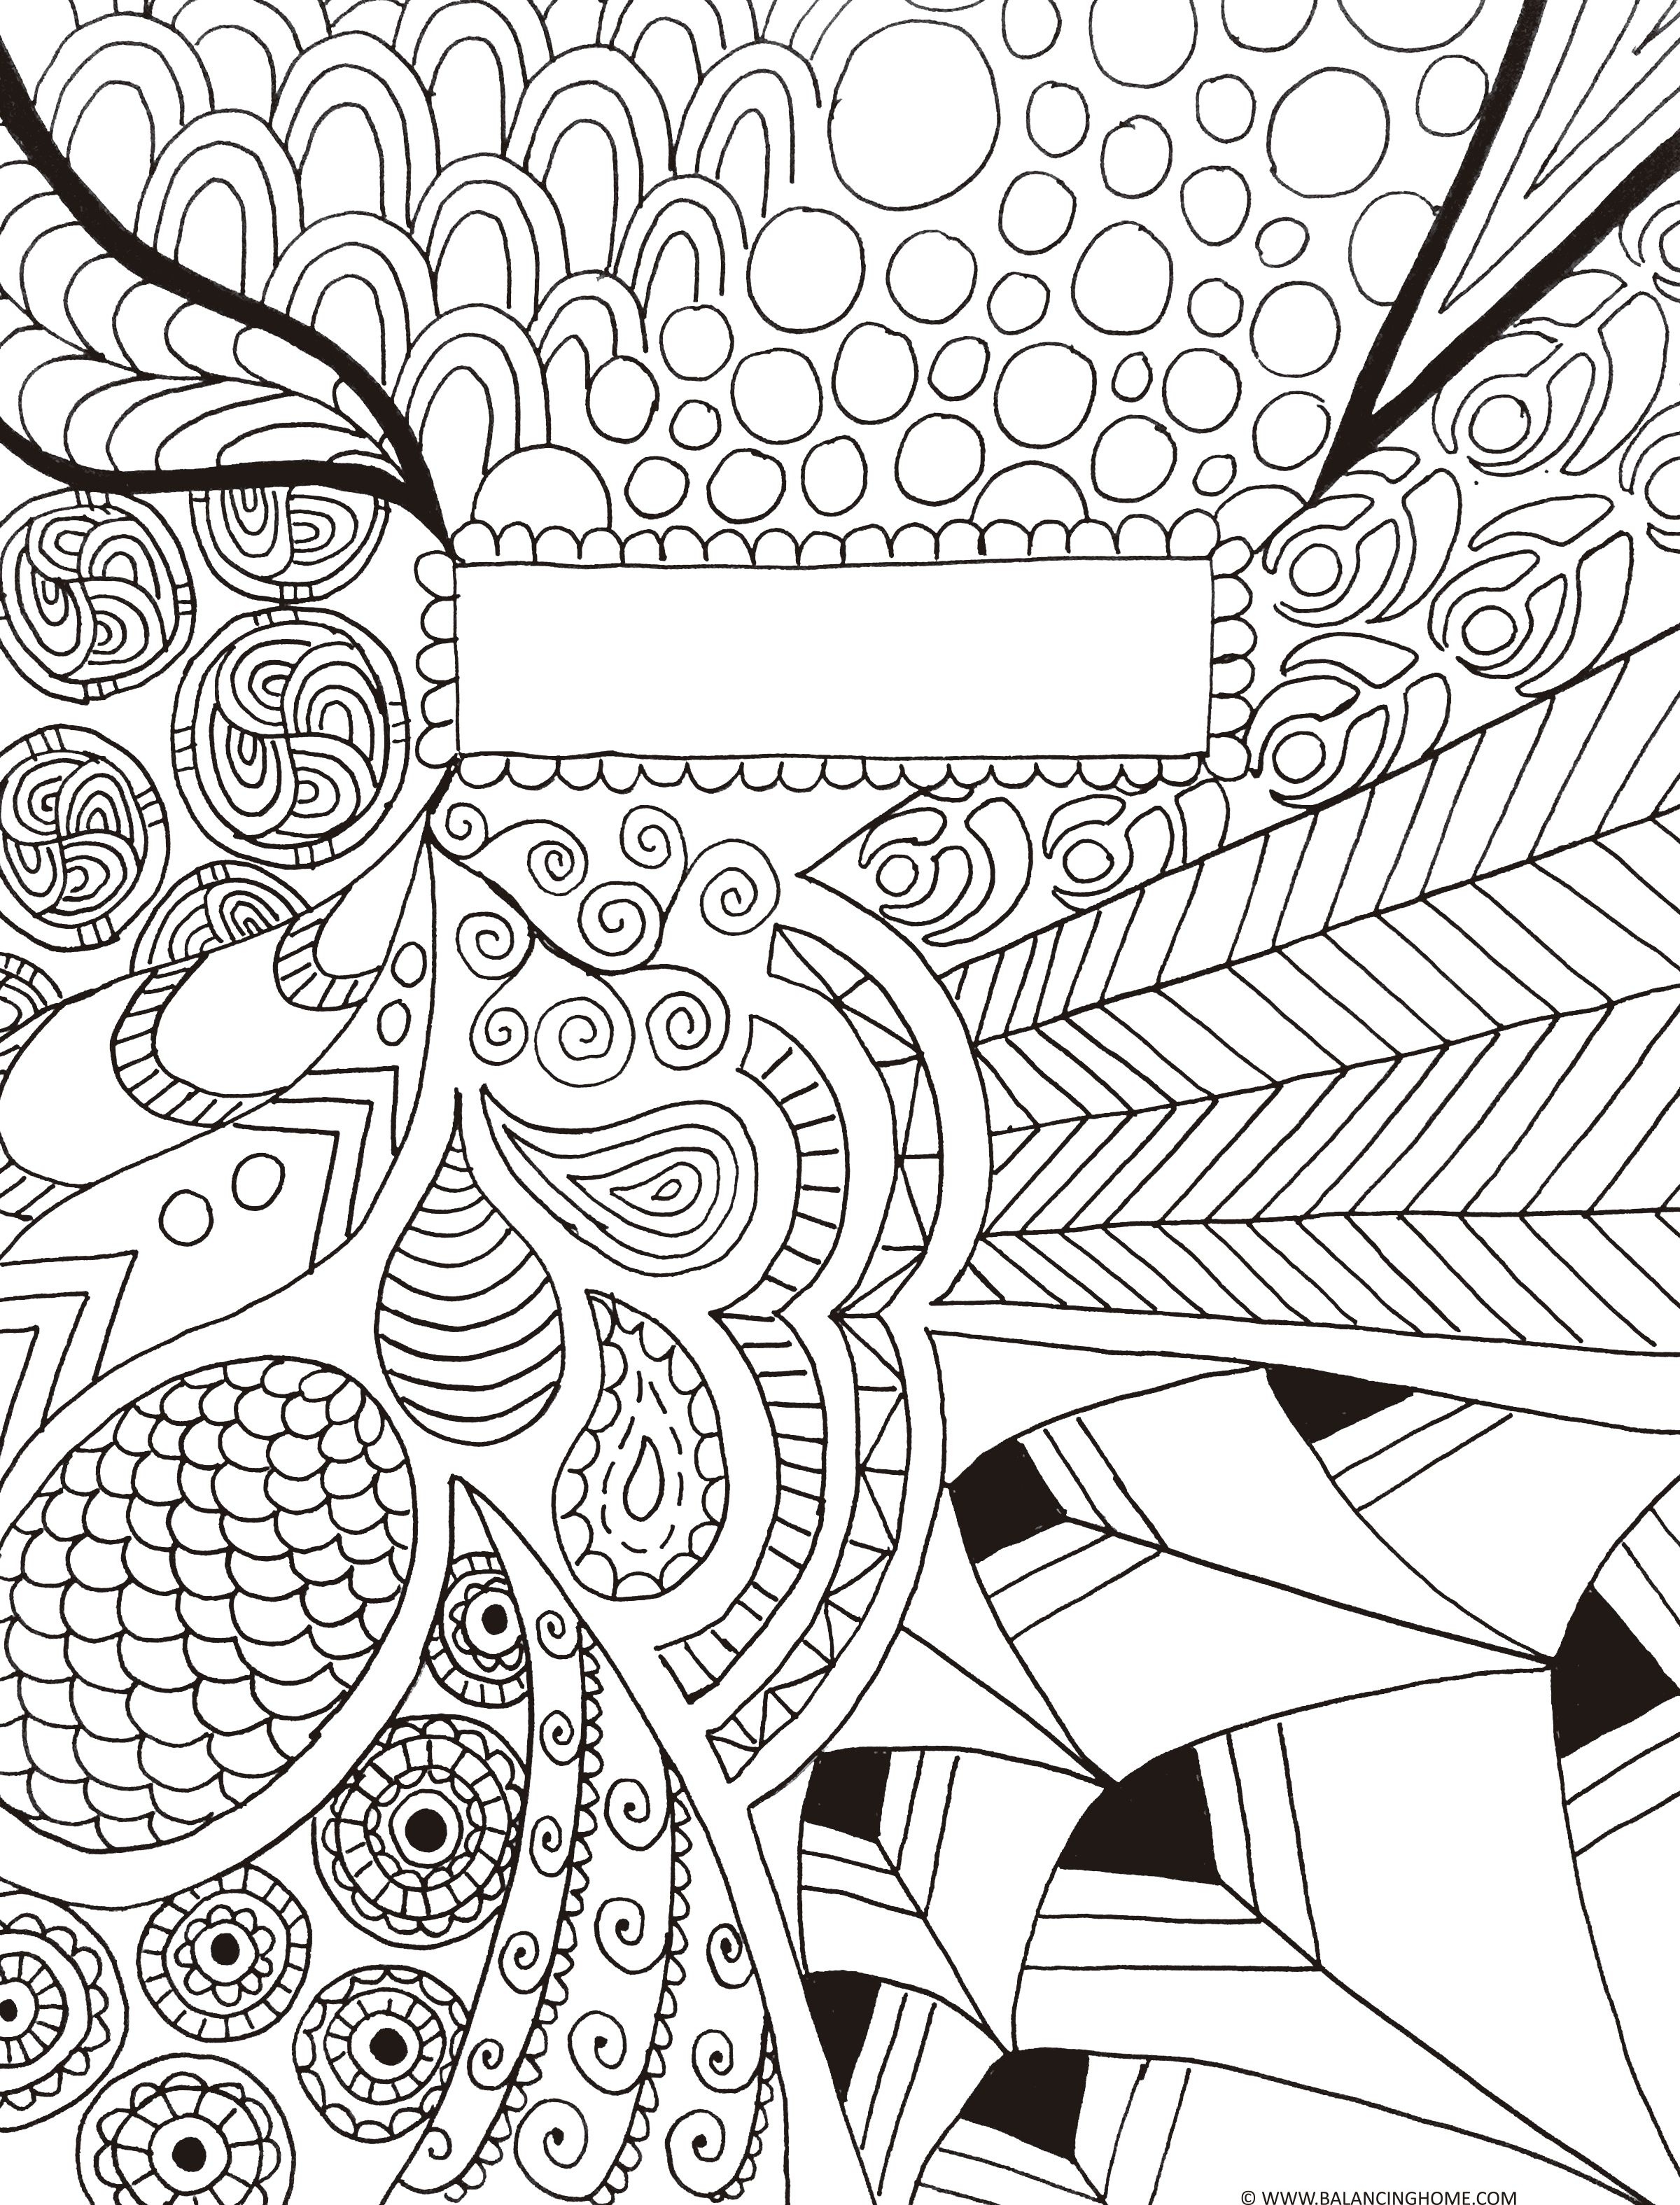  Binder Coloring Pages Free Download Gambr co